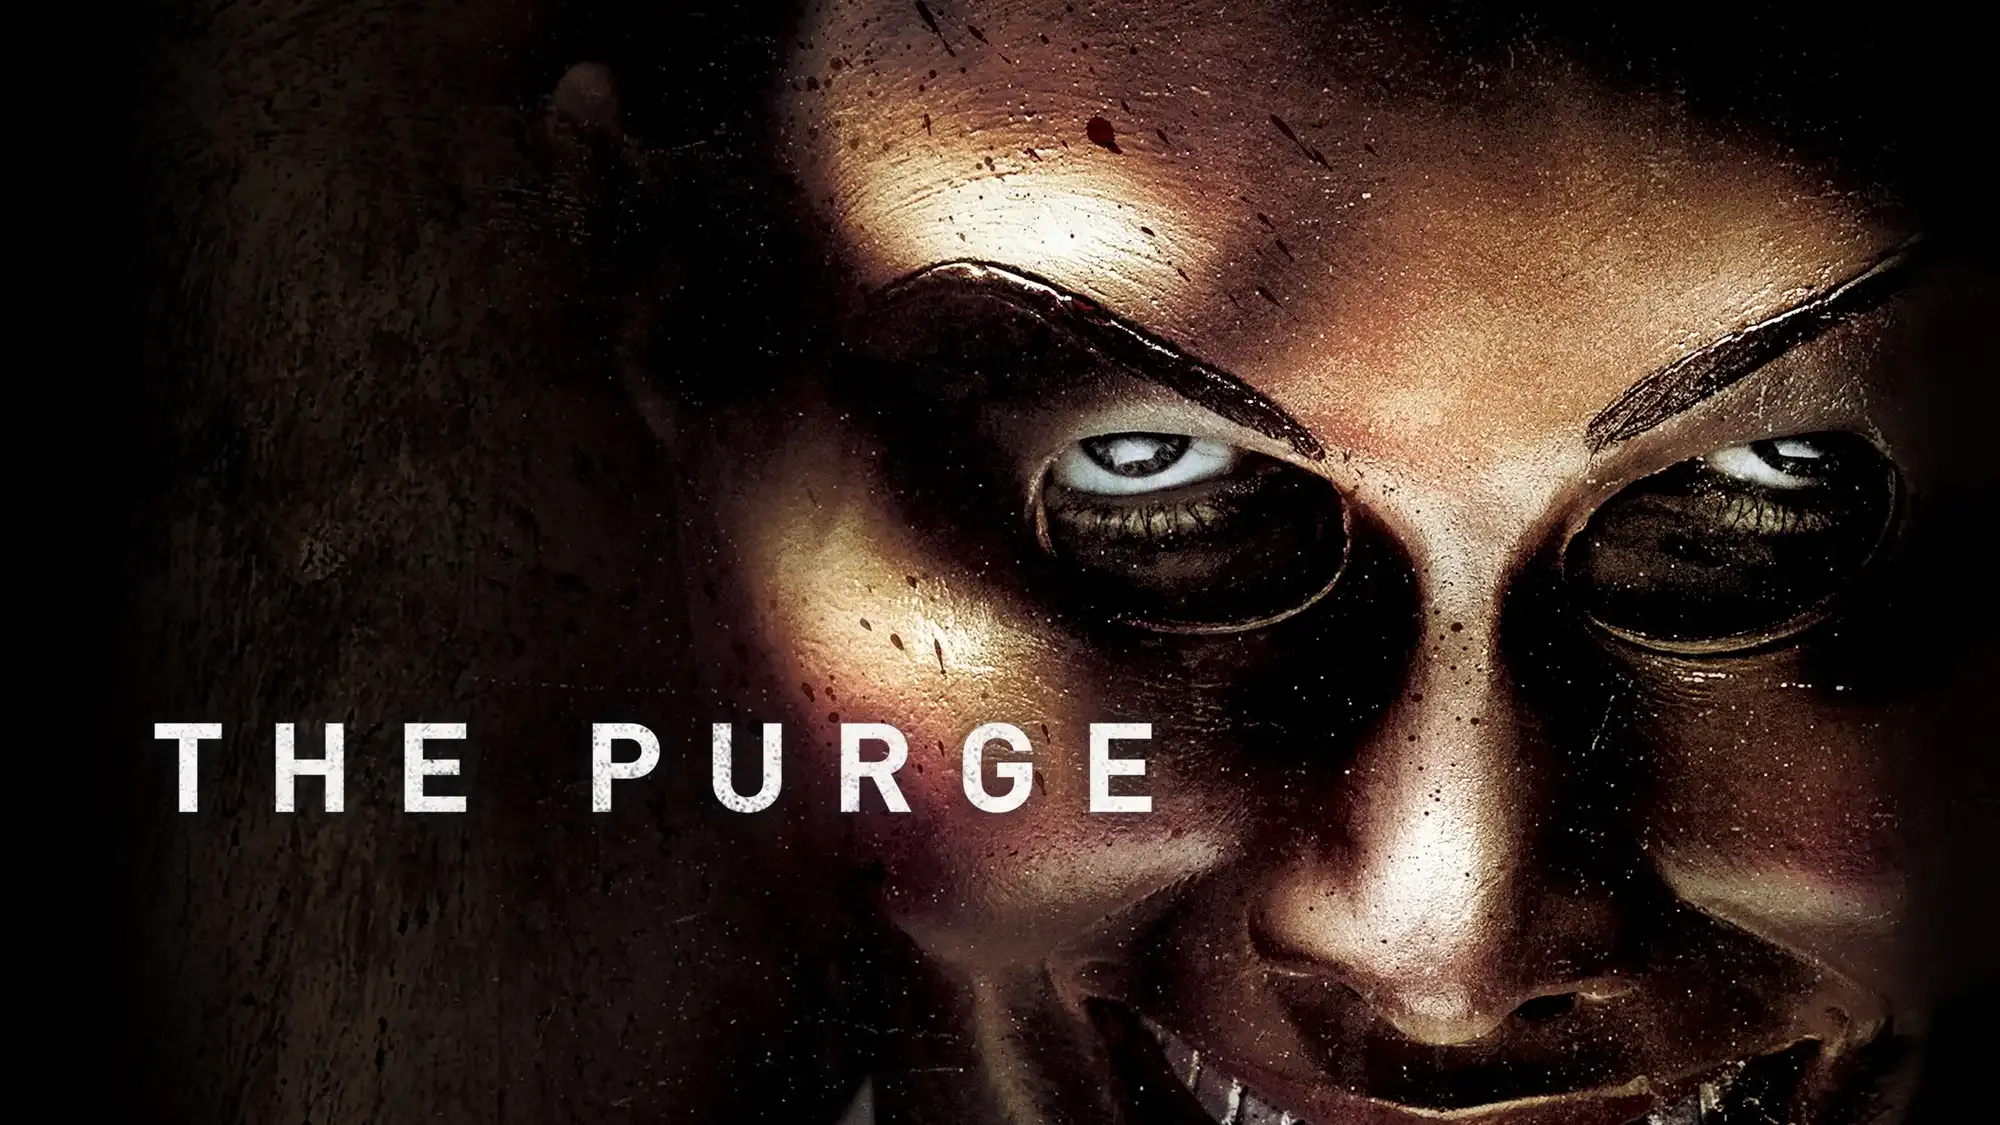 The Purge movie review